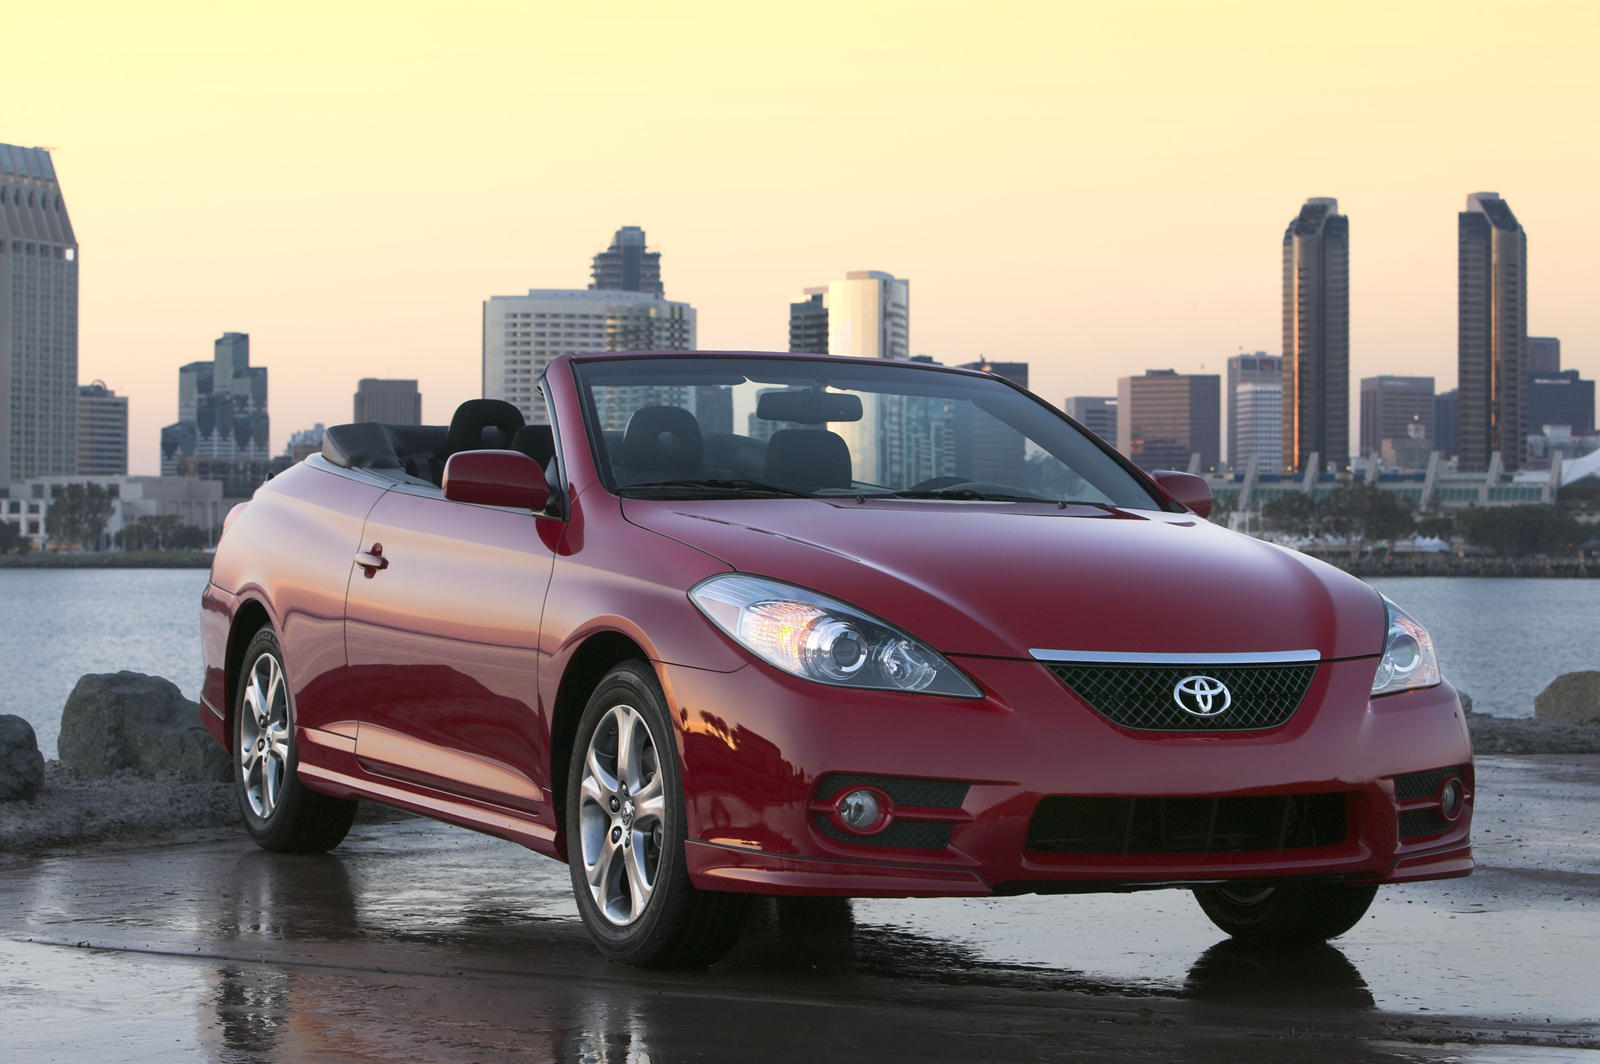 2008 Toyota Camry Solara Convertible Review, Trims, Specs, Price, New